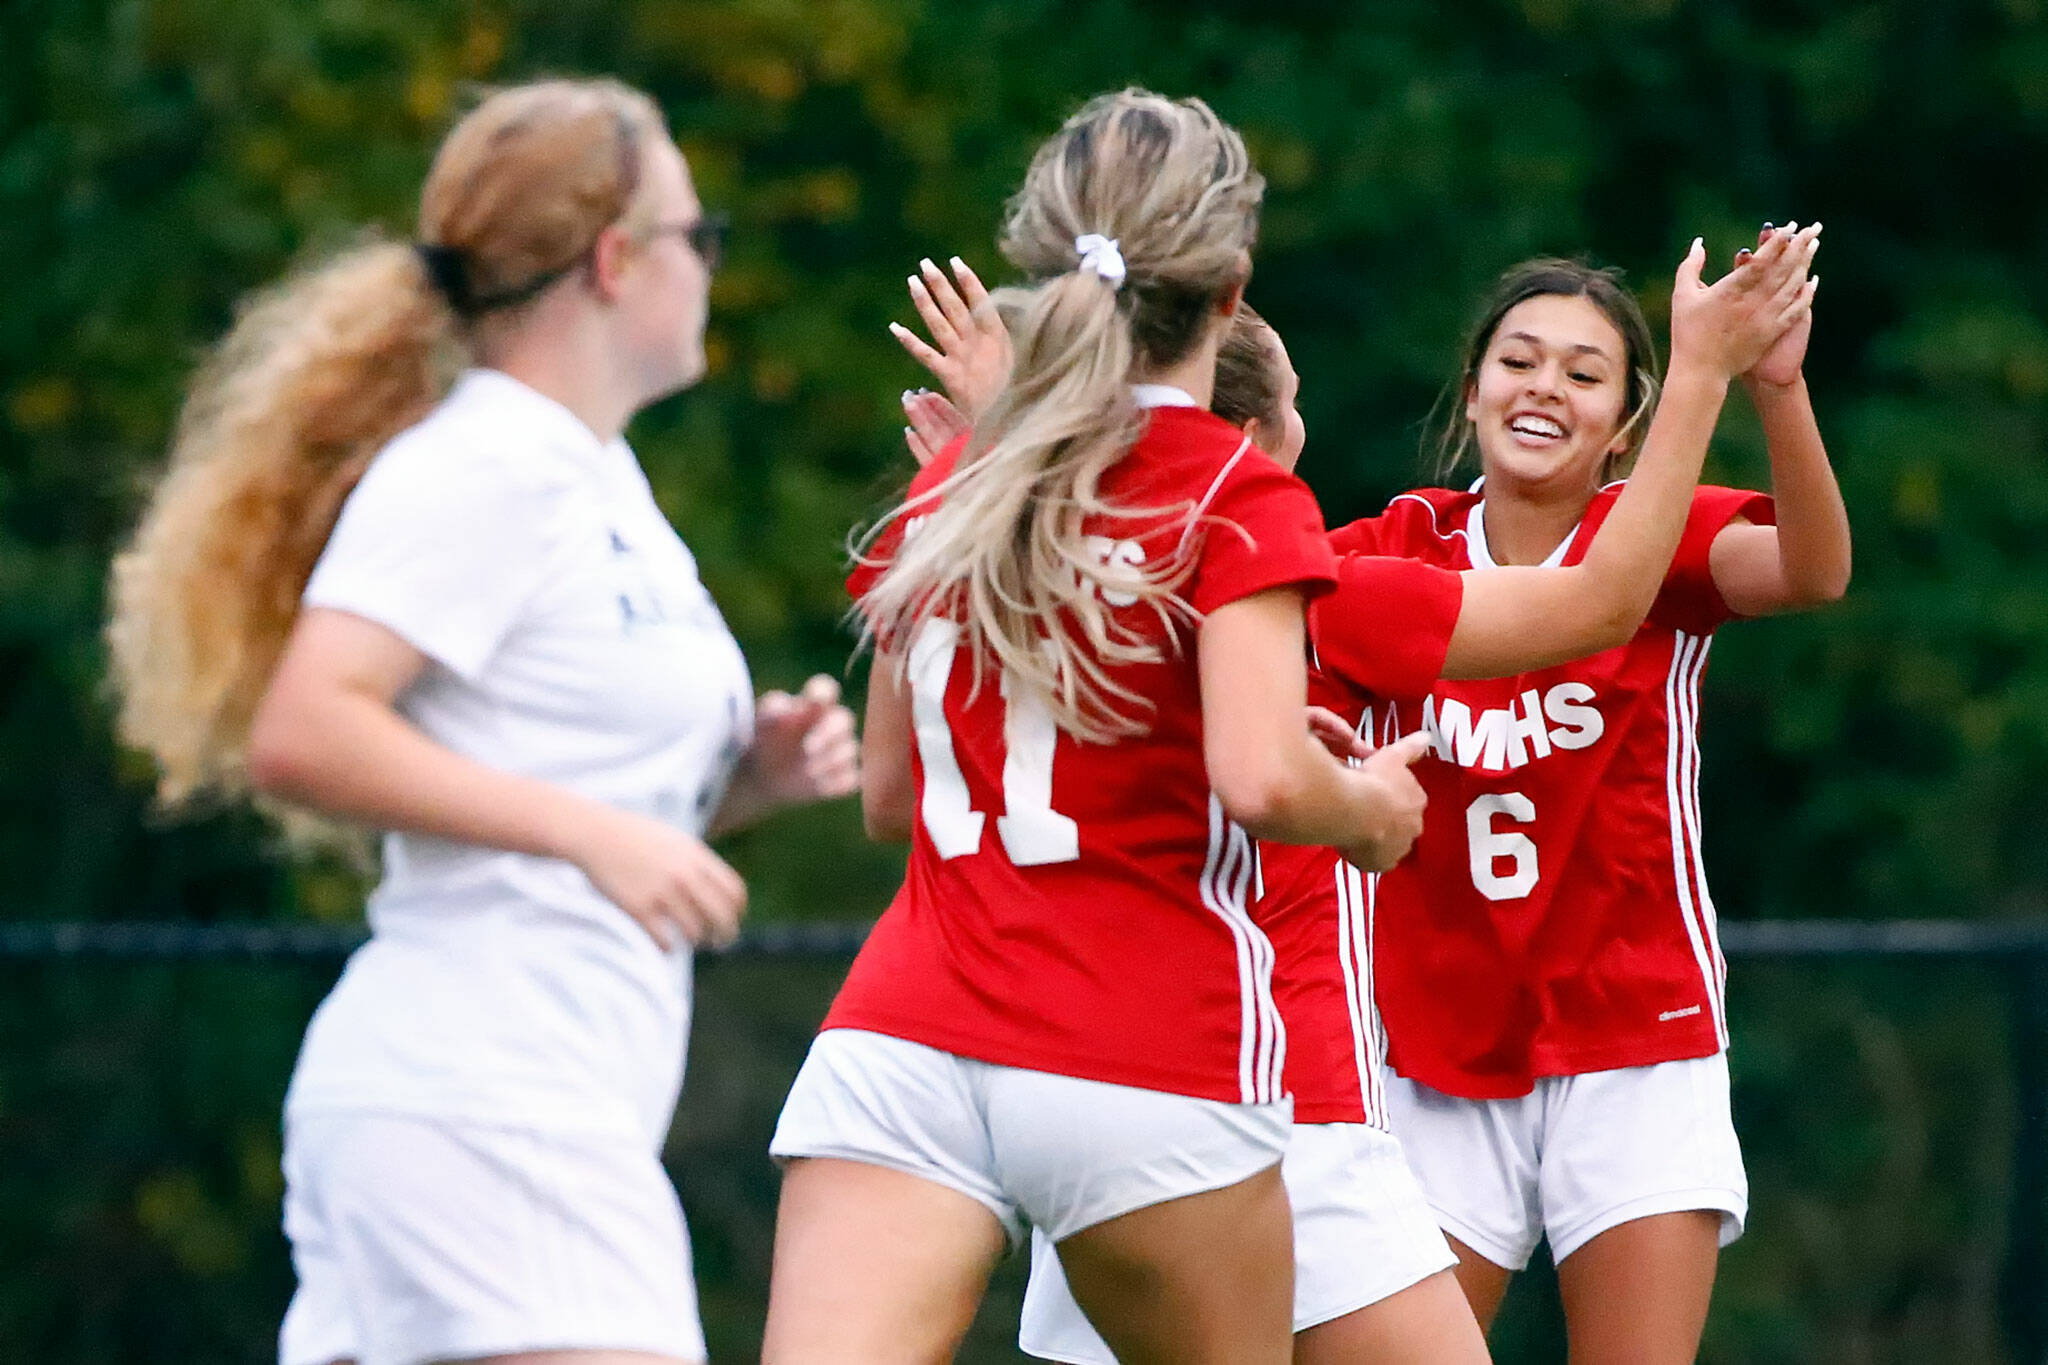 Archbishop Murphy’s Jo Chiangpradit (6) celebrates a goal with teammates during the first half of a game against Everett on Sept. 14 at Archbishop Murphy High School in Everett. The Wildcats won 6-1. (Kevin Clark / The Herald)